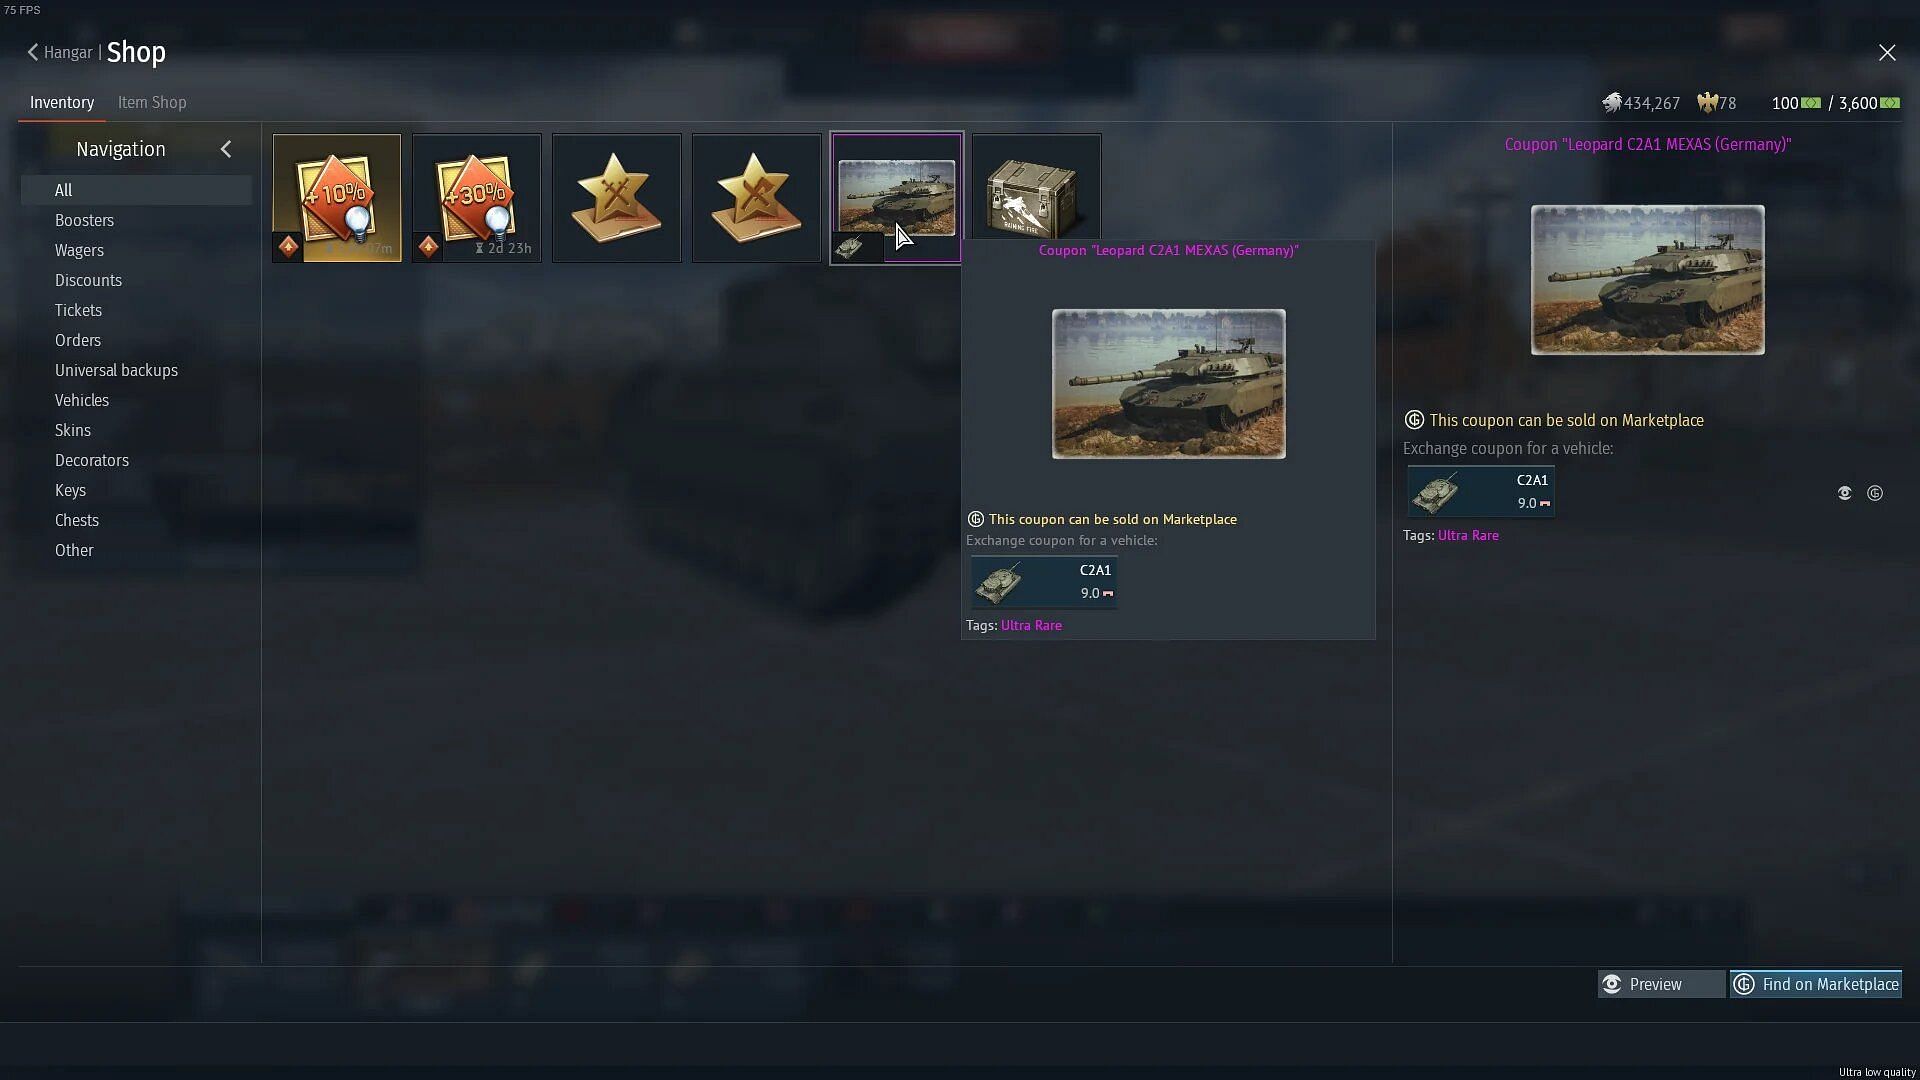 It is ideal to know everything about the vehicle before purchasing it. (Image via War Thunder)